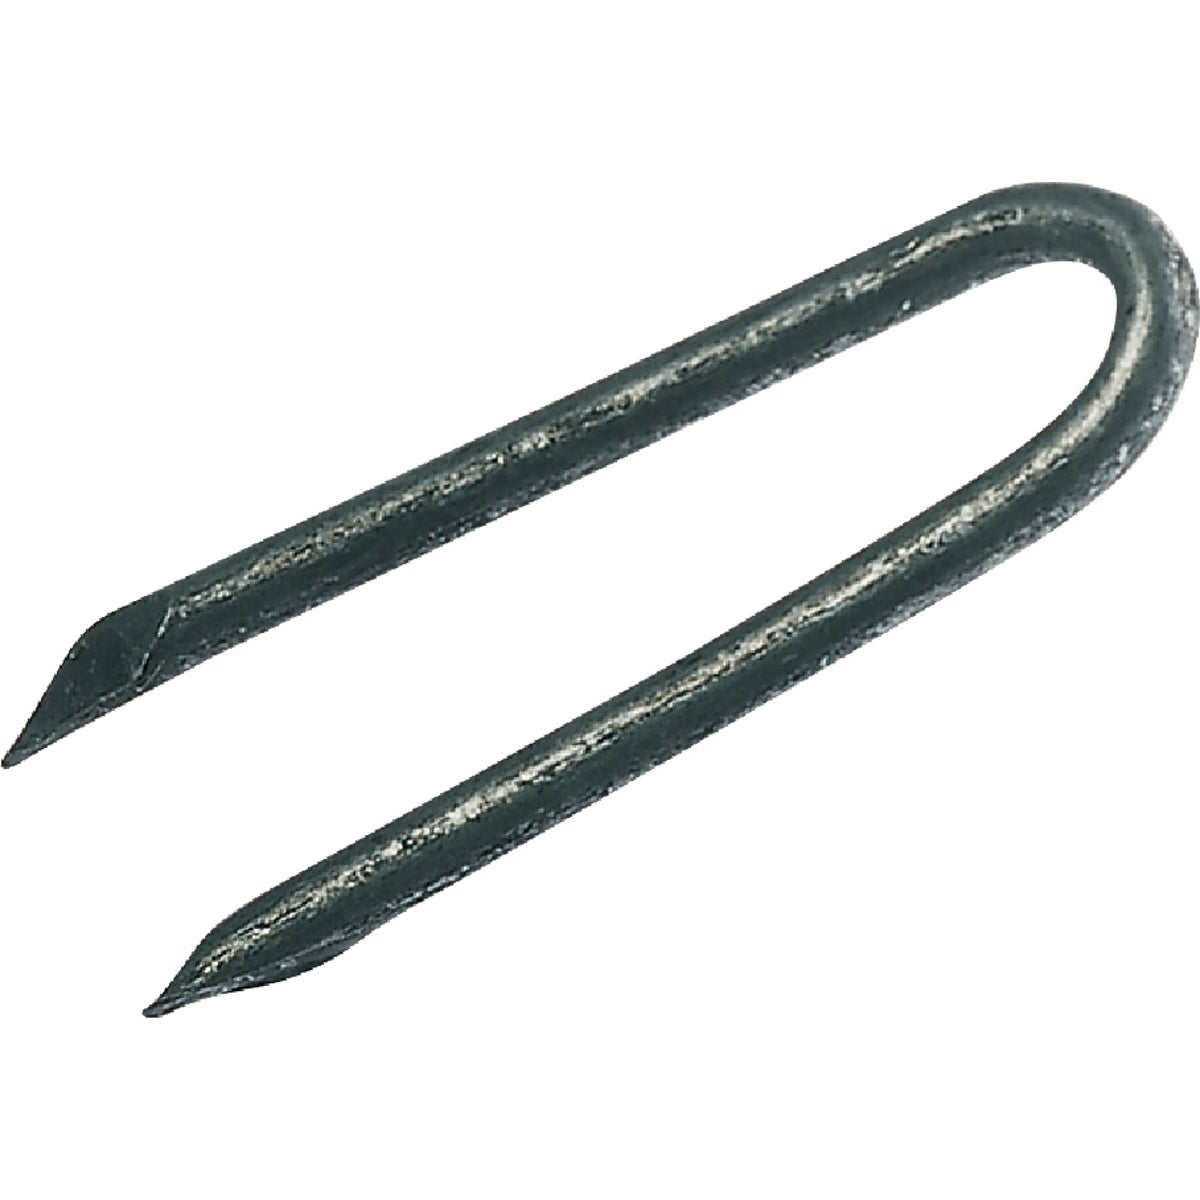 Item 721909, Fence staple is generally used for attaching woven wire fence, welded fence